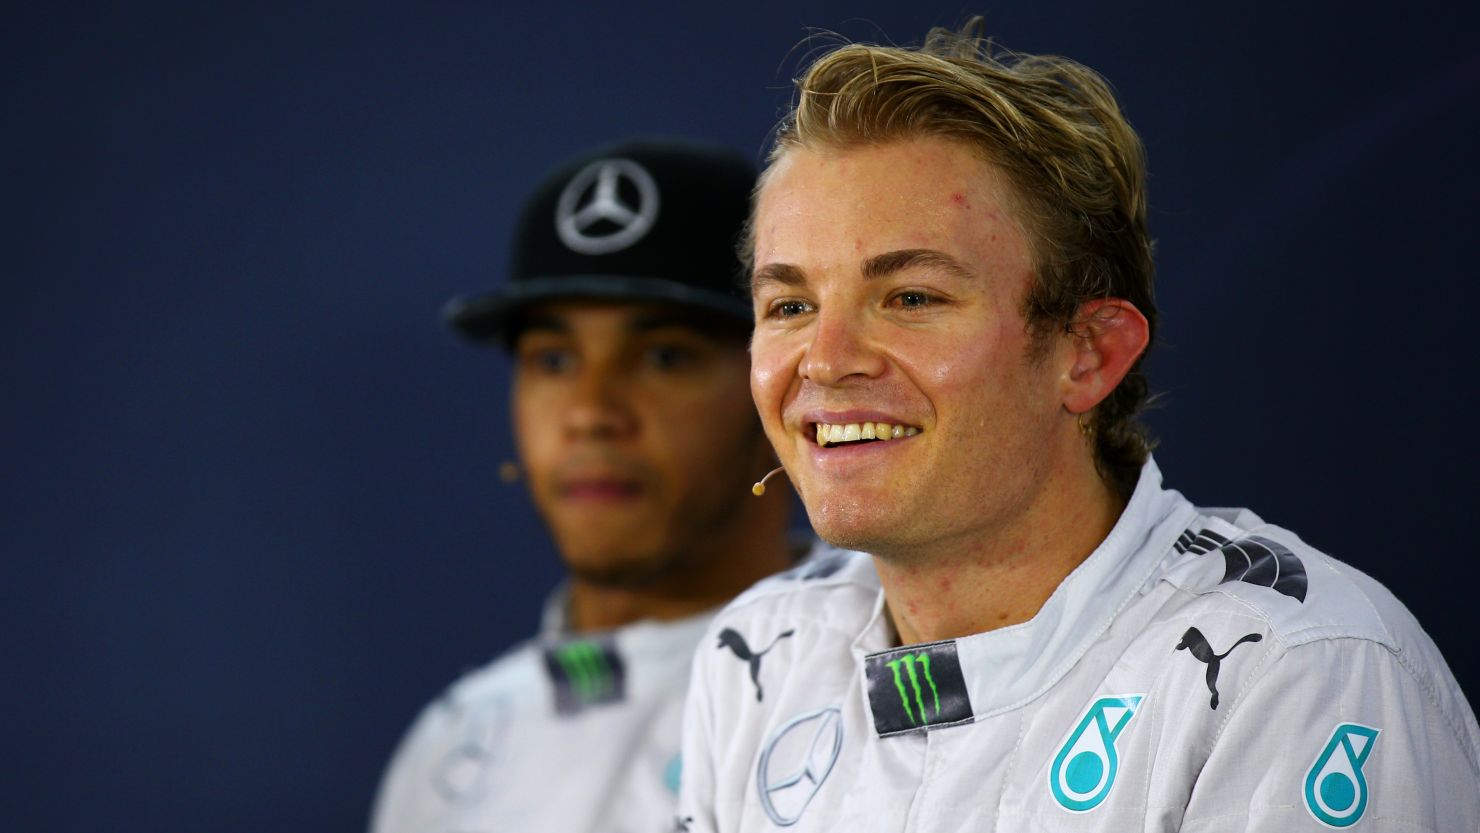 Rosberg beat Hamilton to pole at Interlagos by the smallest of margins.